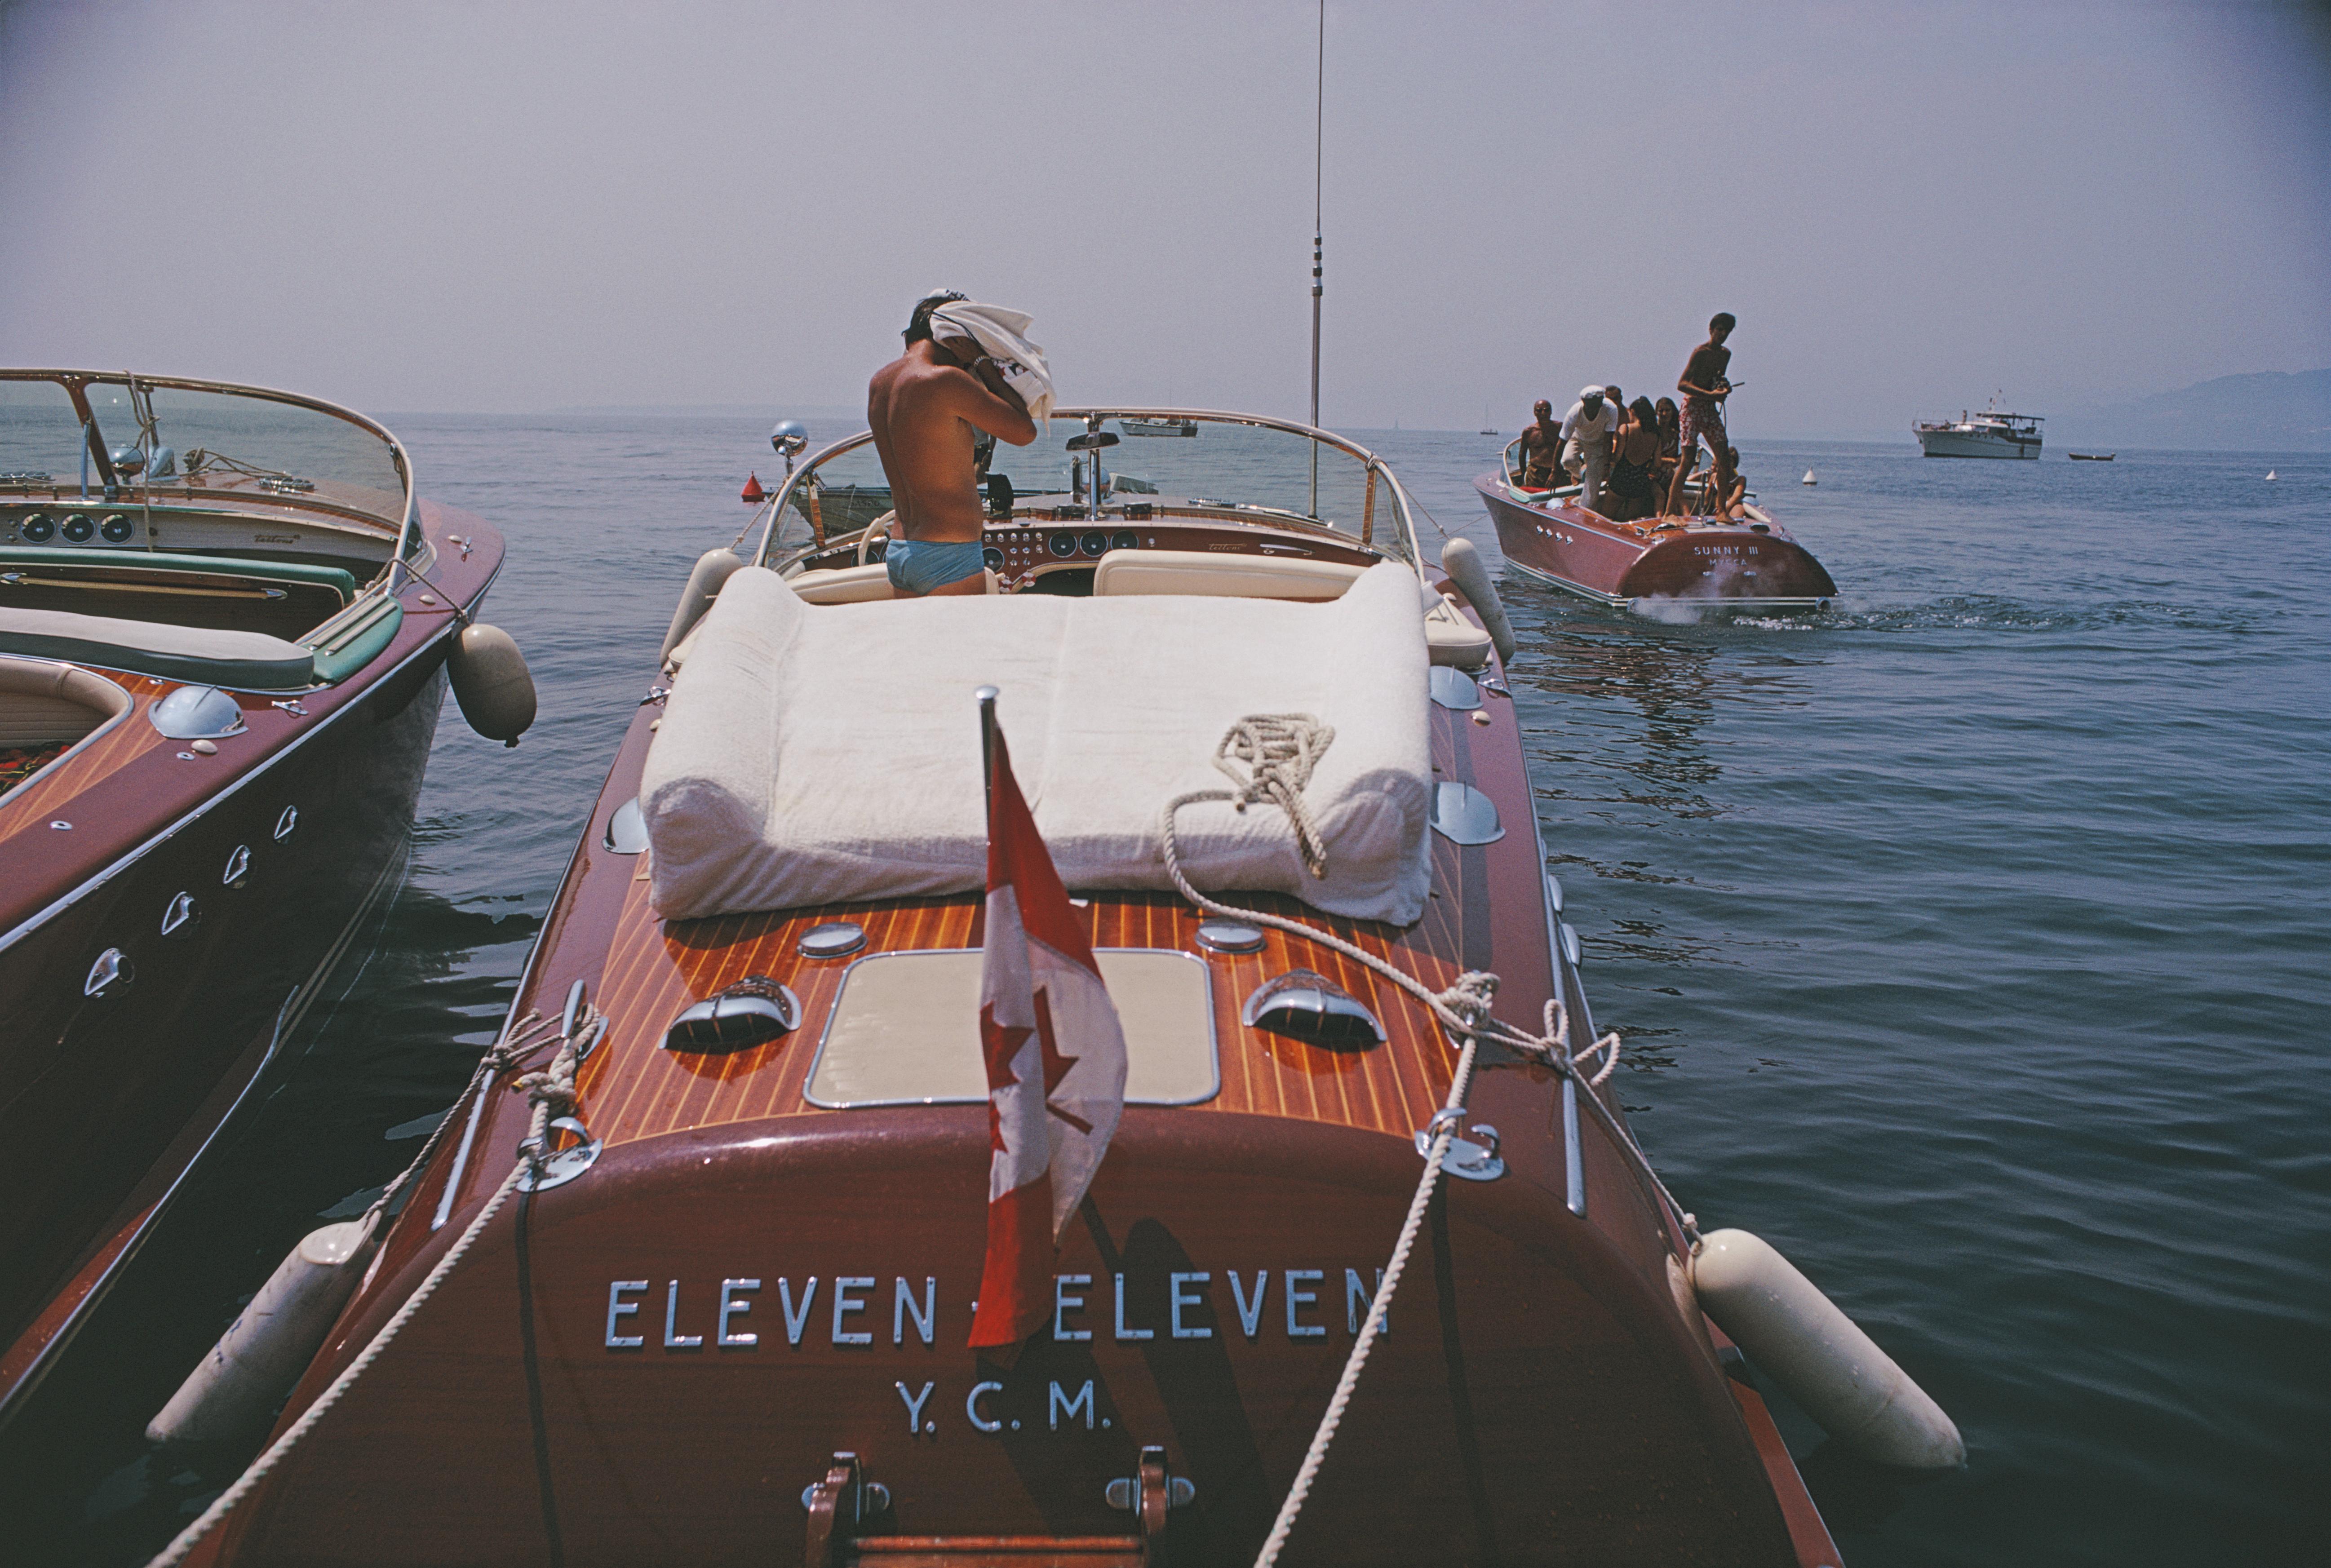 'Motorboats In Antibes' 1969 Slim Aarons Limited Estate Edition Print 

Motorboats moored on the coast near the Hotel du Cap-Eden-Roc in Antibes on the French Riviera, August 1969.

Produced from the original transparency
Certificate of authenticity